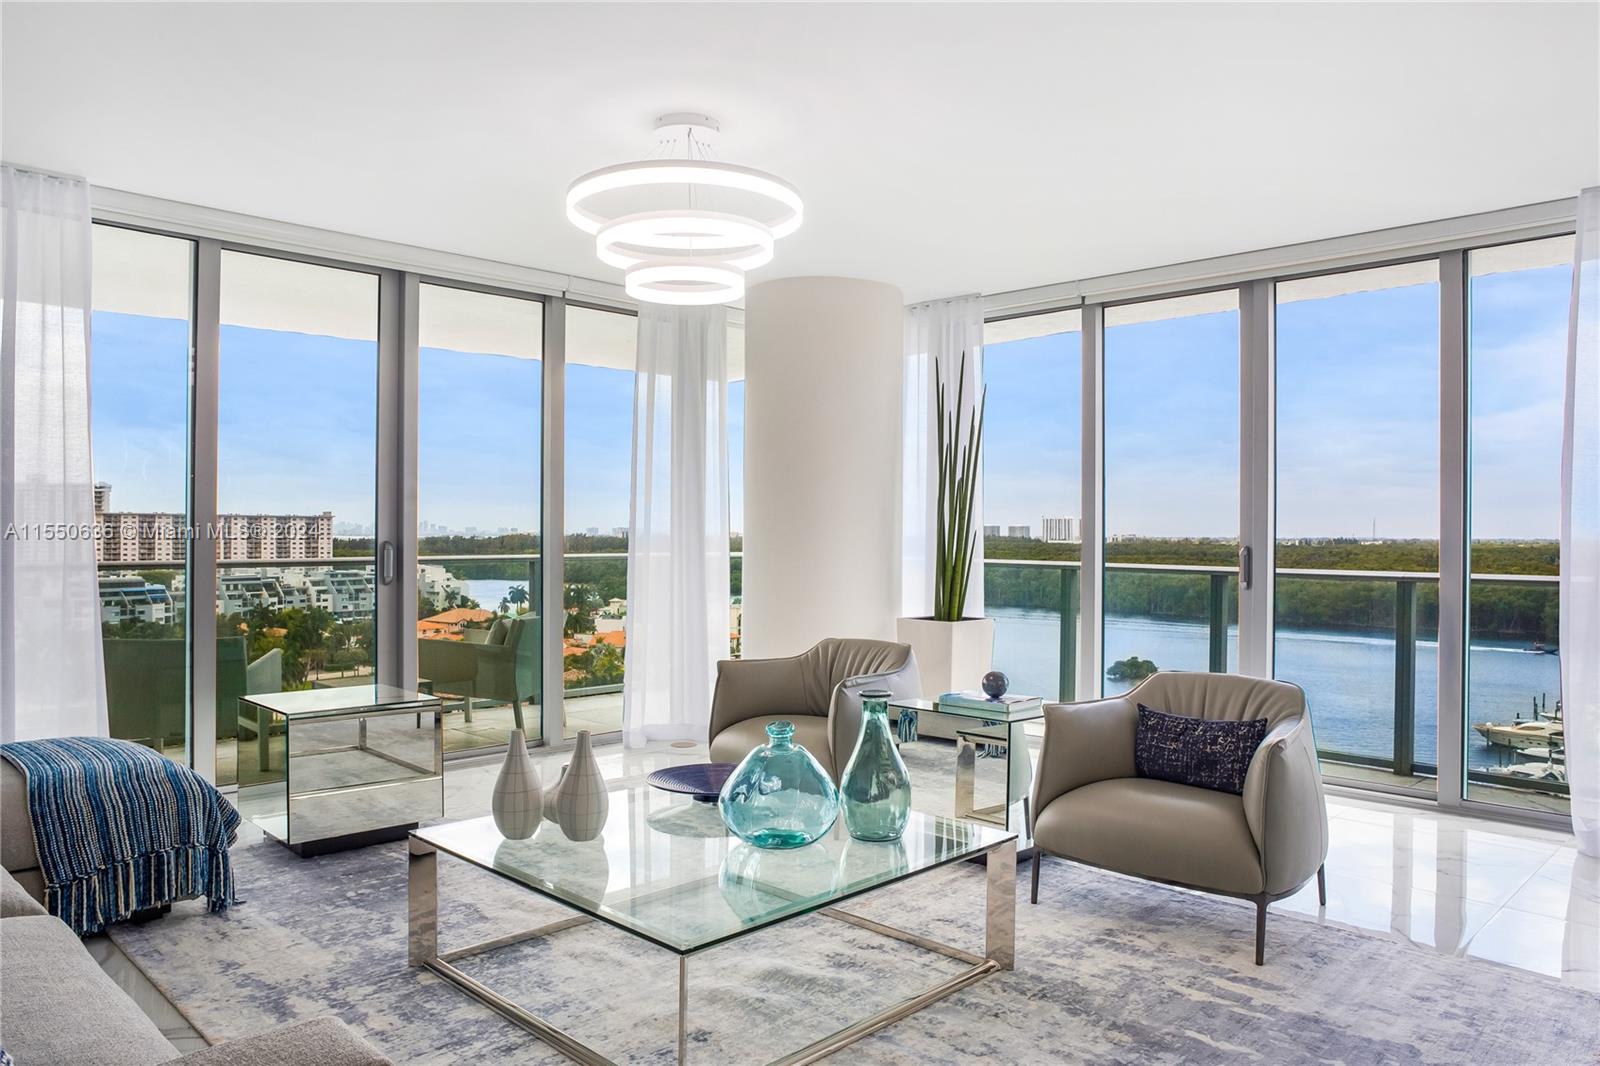 Upscale delight resort living unit at Parque Towers, a 2019 luxury building in Sunny Isles, one block from the beach. Surrounded by boutiques, stores, bistros, cafés and entertainment, it also offers physical fitness and wellness programs, professional housekeeping service, valet parking, a 6 star concierge, marina and private beach club. Amenities include a dedicated pool for kids, resistance pool and a poolside lounge. The unit has been upgraded with California closets, porcelain tiles, open kitchen, electric shades in the living room and blackout shades in the bedrooms. Enjoy breathtaking sunsets over Oleta Park and iconic sunrises overlooking the ocean.